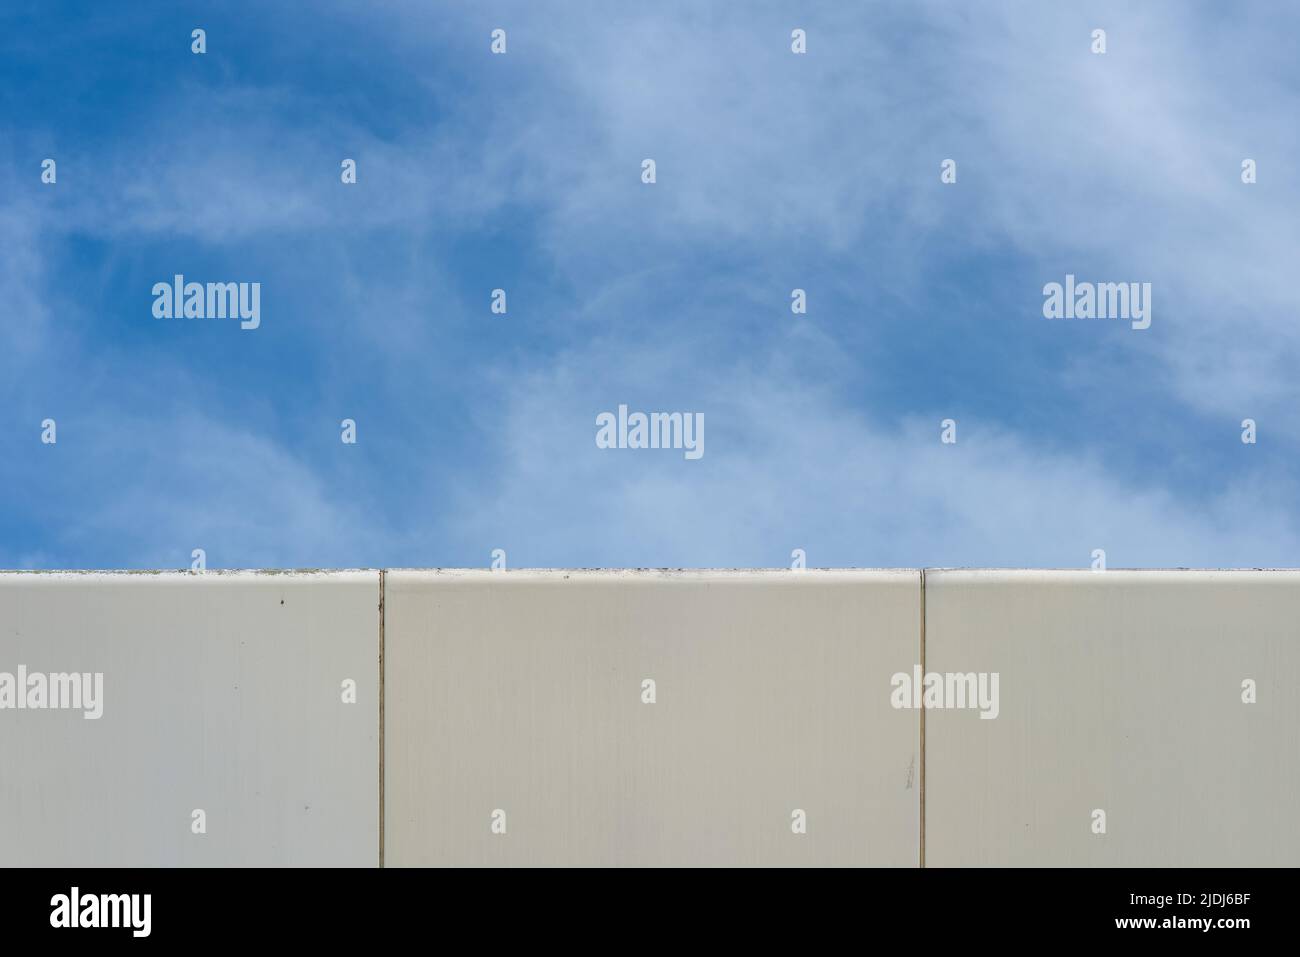 Abstract image, the corner of a modern building contrasting with the blue sky and soft white clouds. Stock Photo